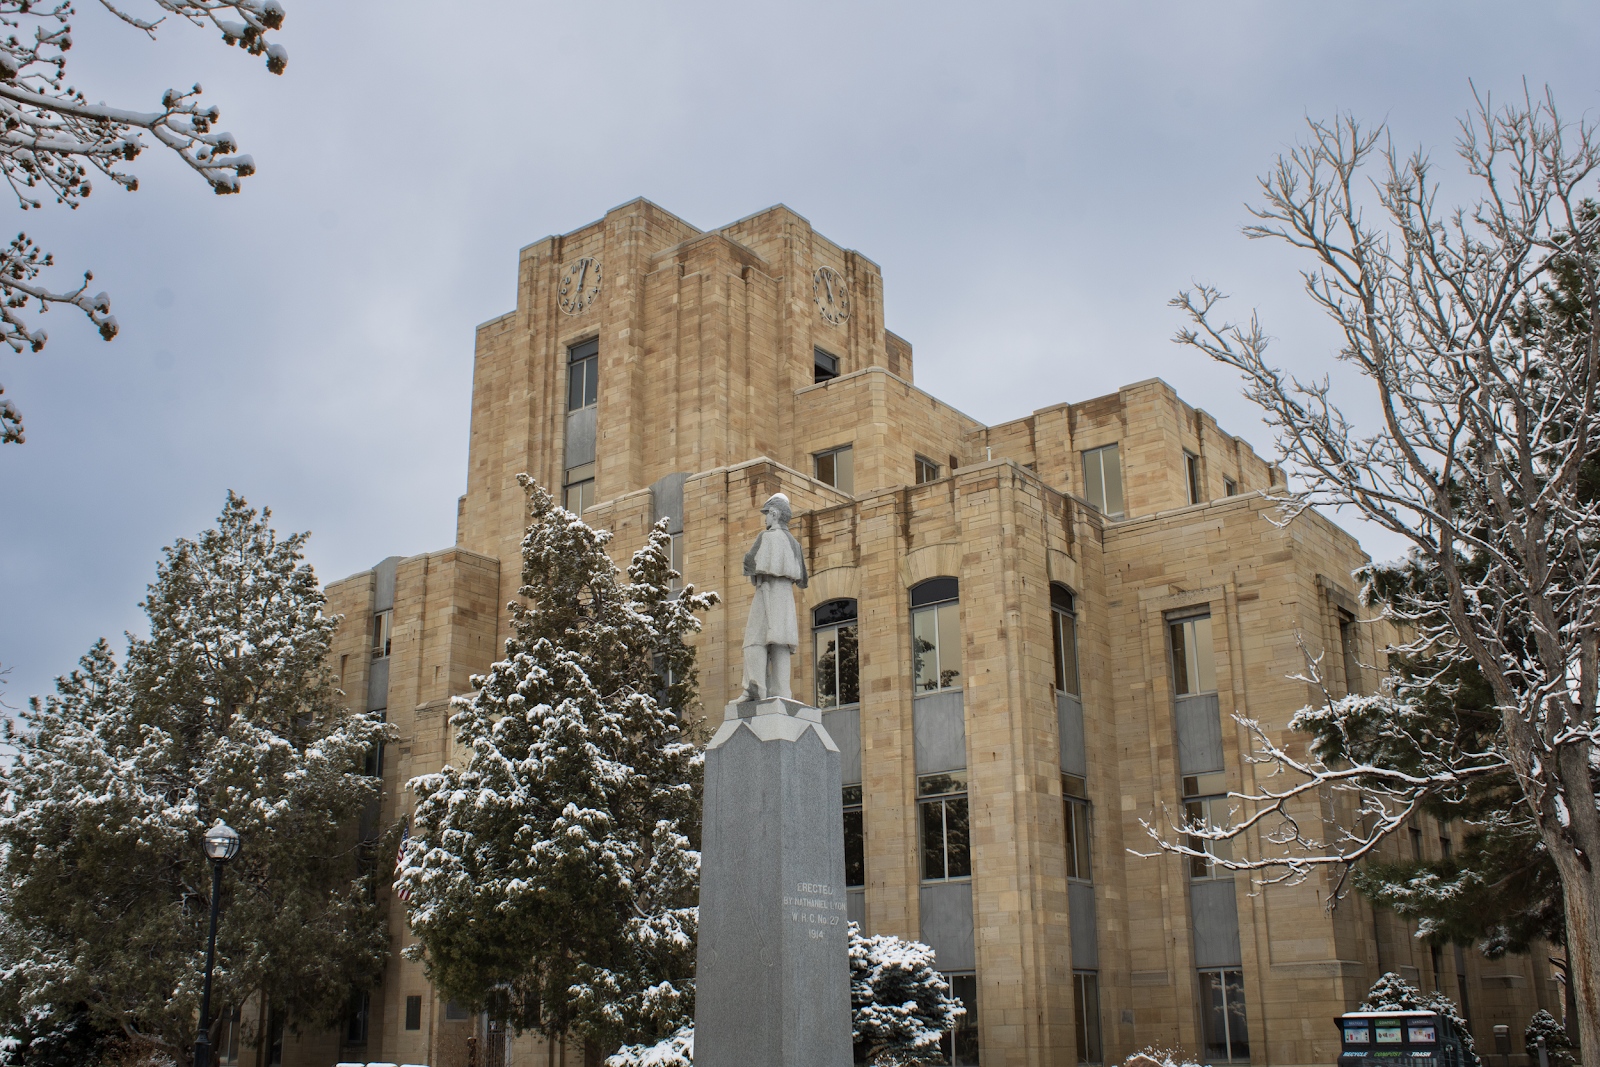  Boulder Court House exterior in the snow